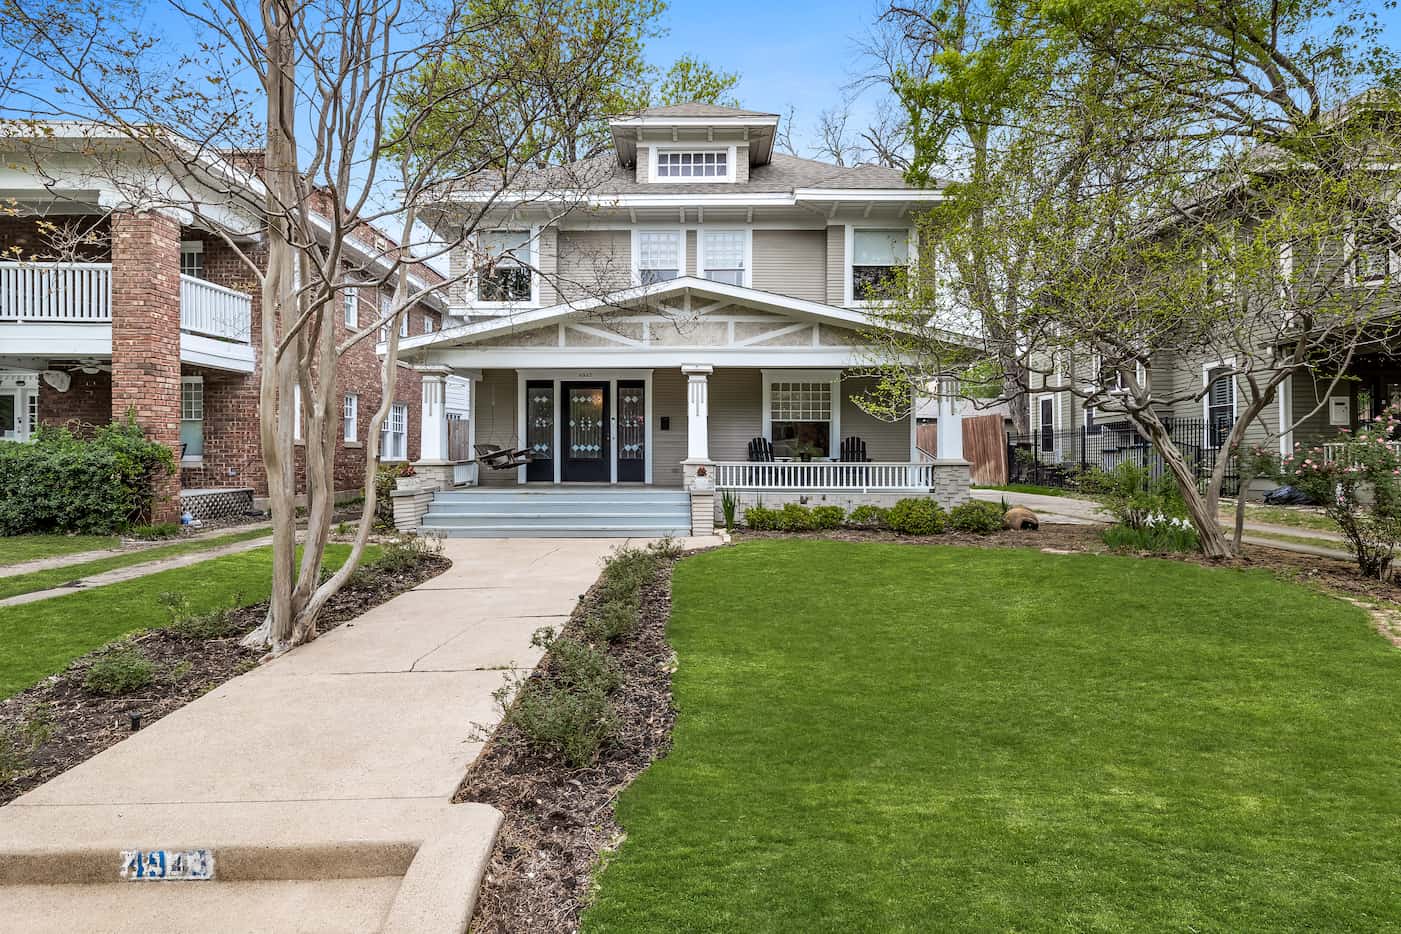 Built in 1906, this Prairie home is located in the historic Munger Place neighborhood.